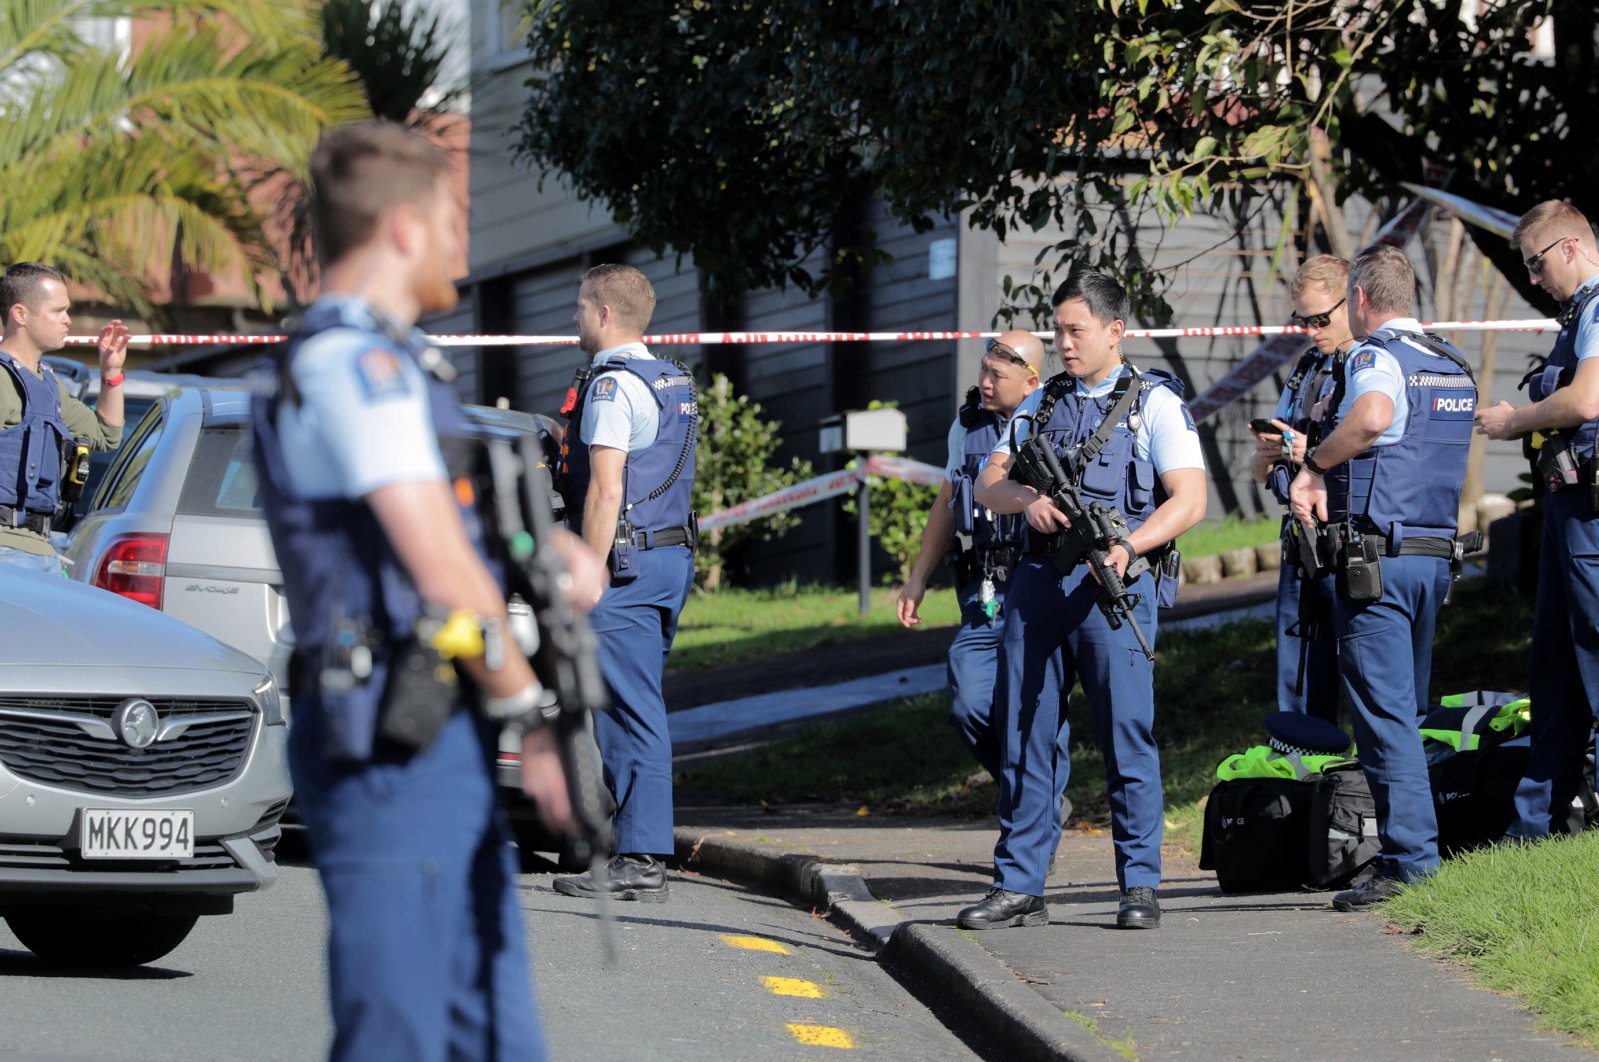 Armed police gather at the scene of a shooting incident following a routine traffic stop, Auckland, New Zealand, June 19, 2020. (AP Photo)